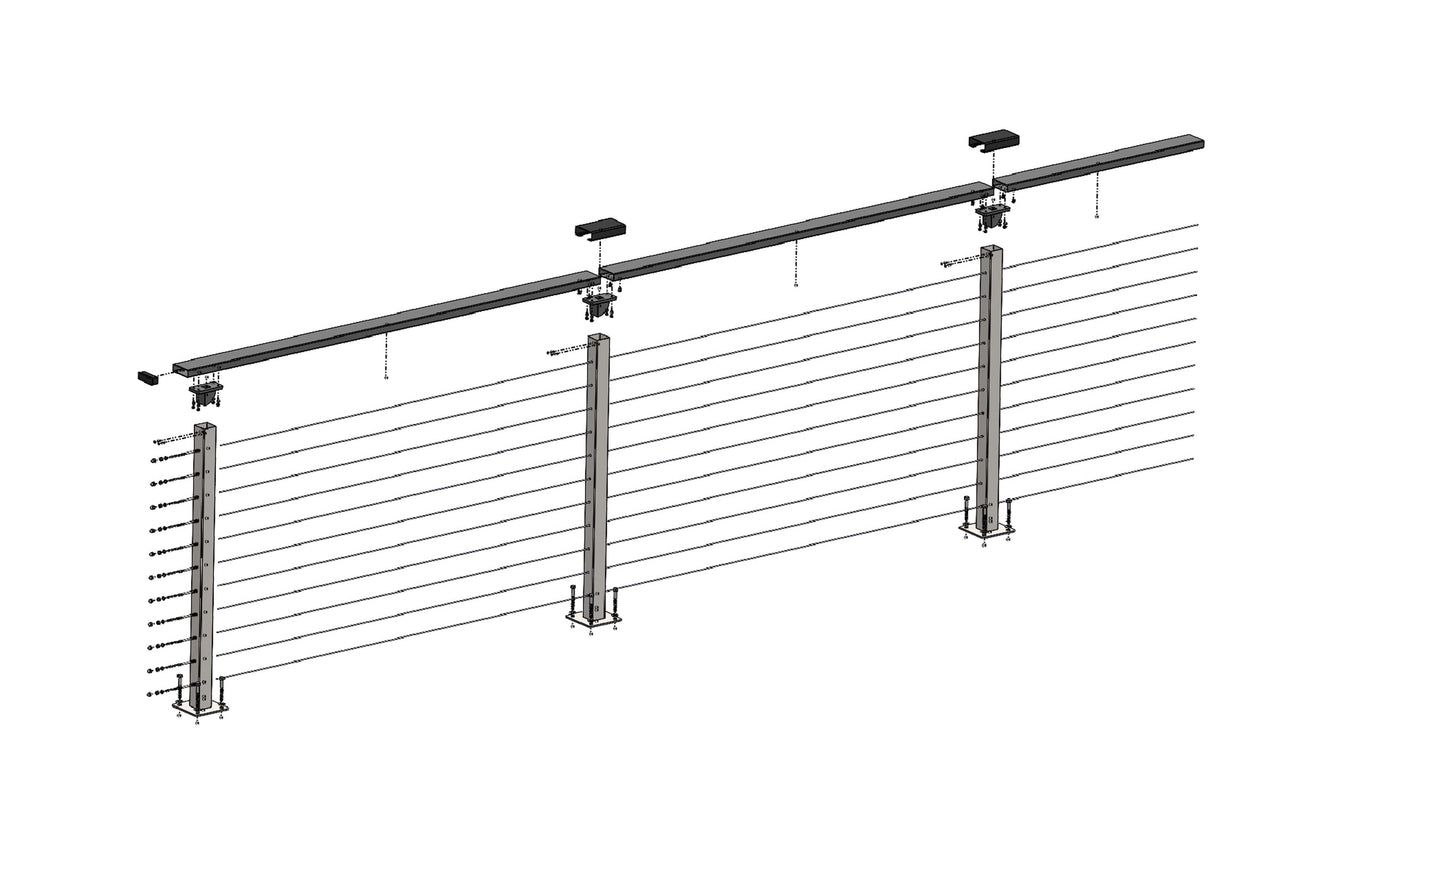 43 ft. x 42 in. Bronze Deck Cable Railing, Base Mount , Stainless